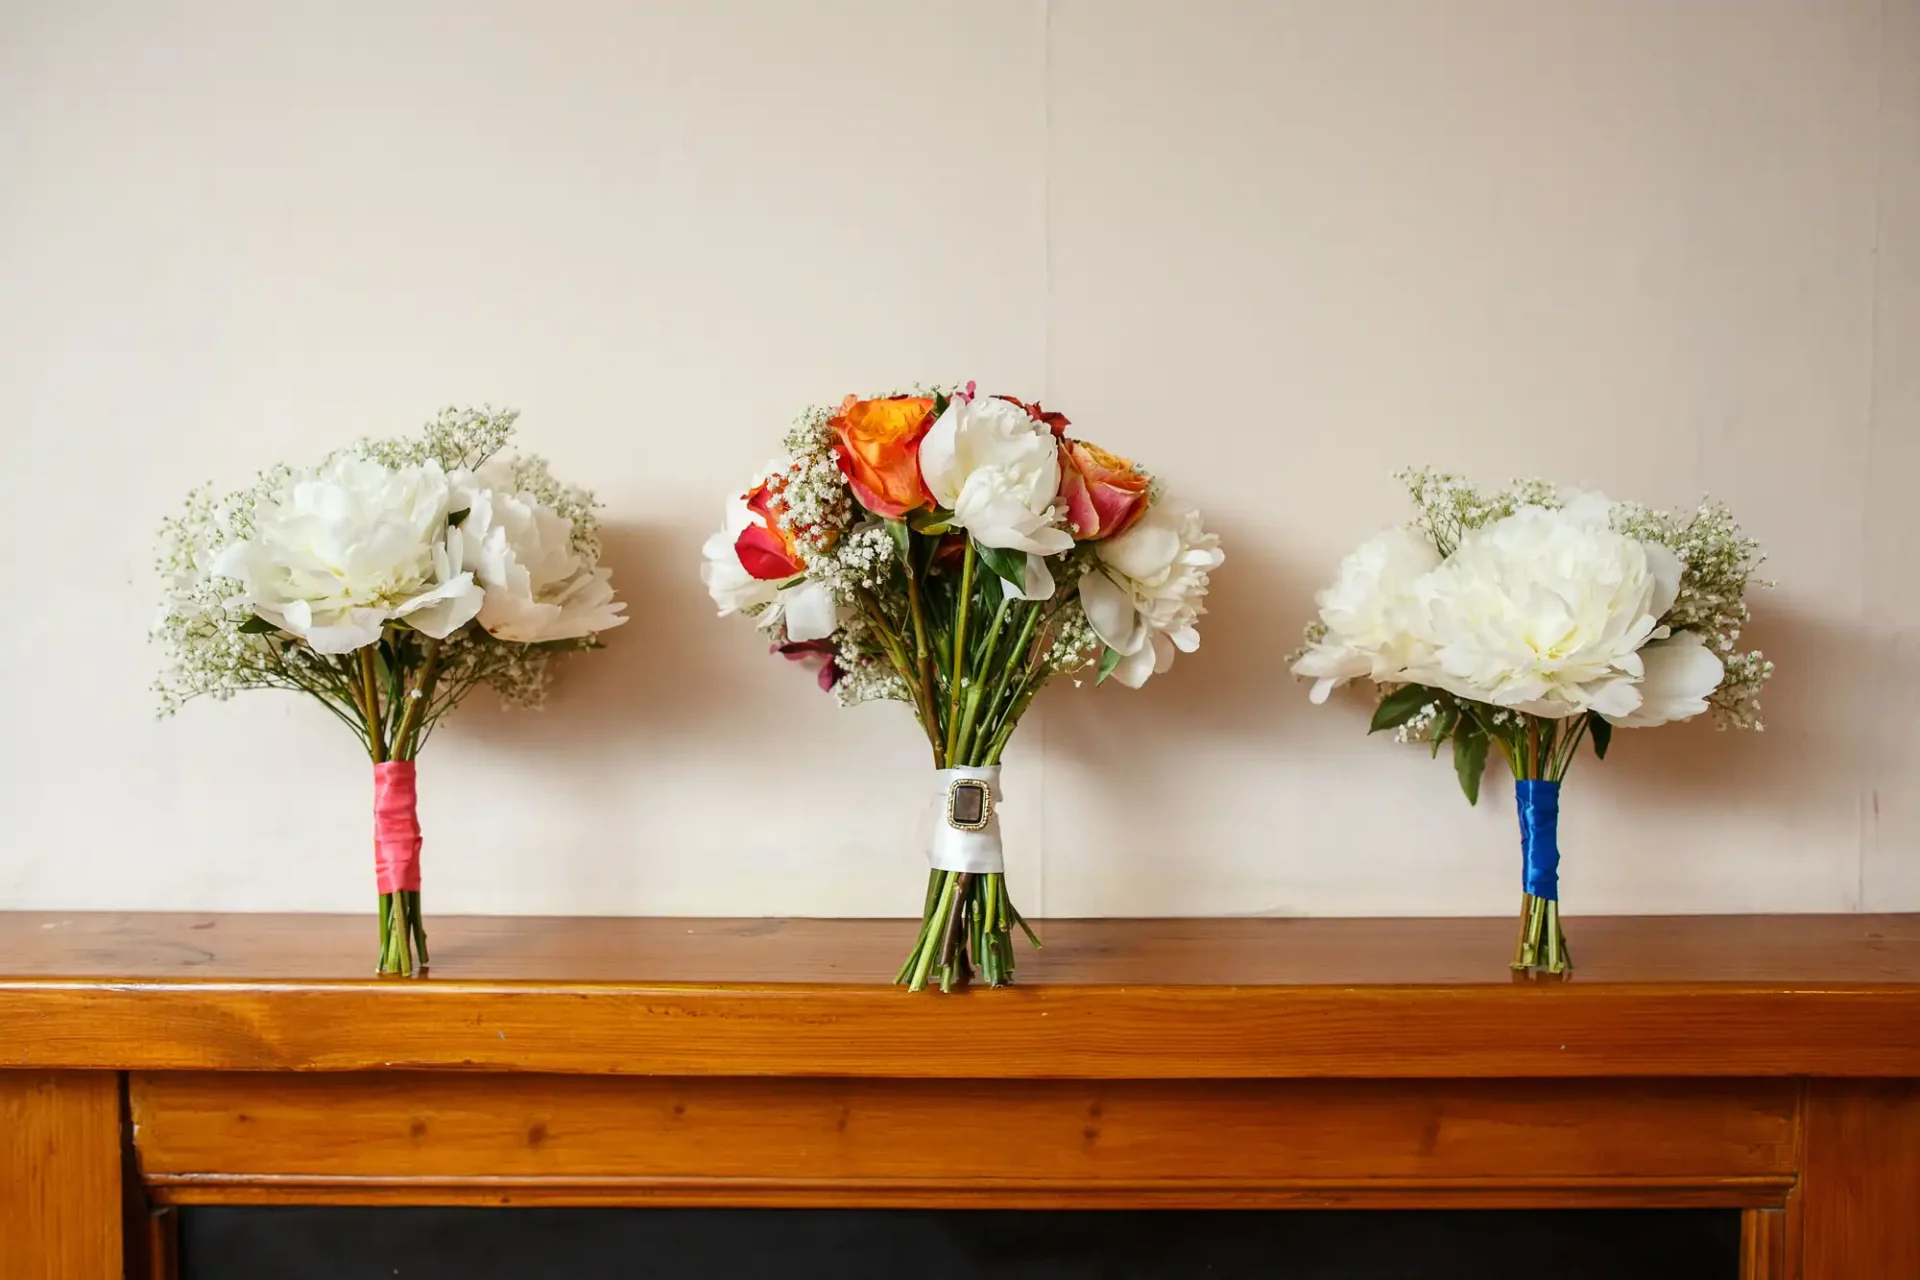 Three bridal bouquets with white and orange flowers wrapped in colorful ribbons, displayed on a wooden surface against a plain wall.